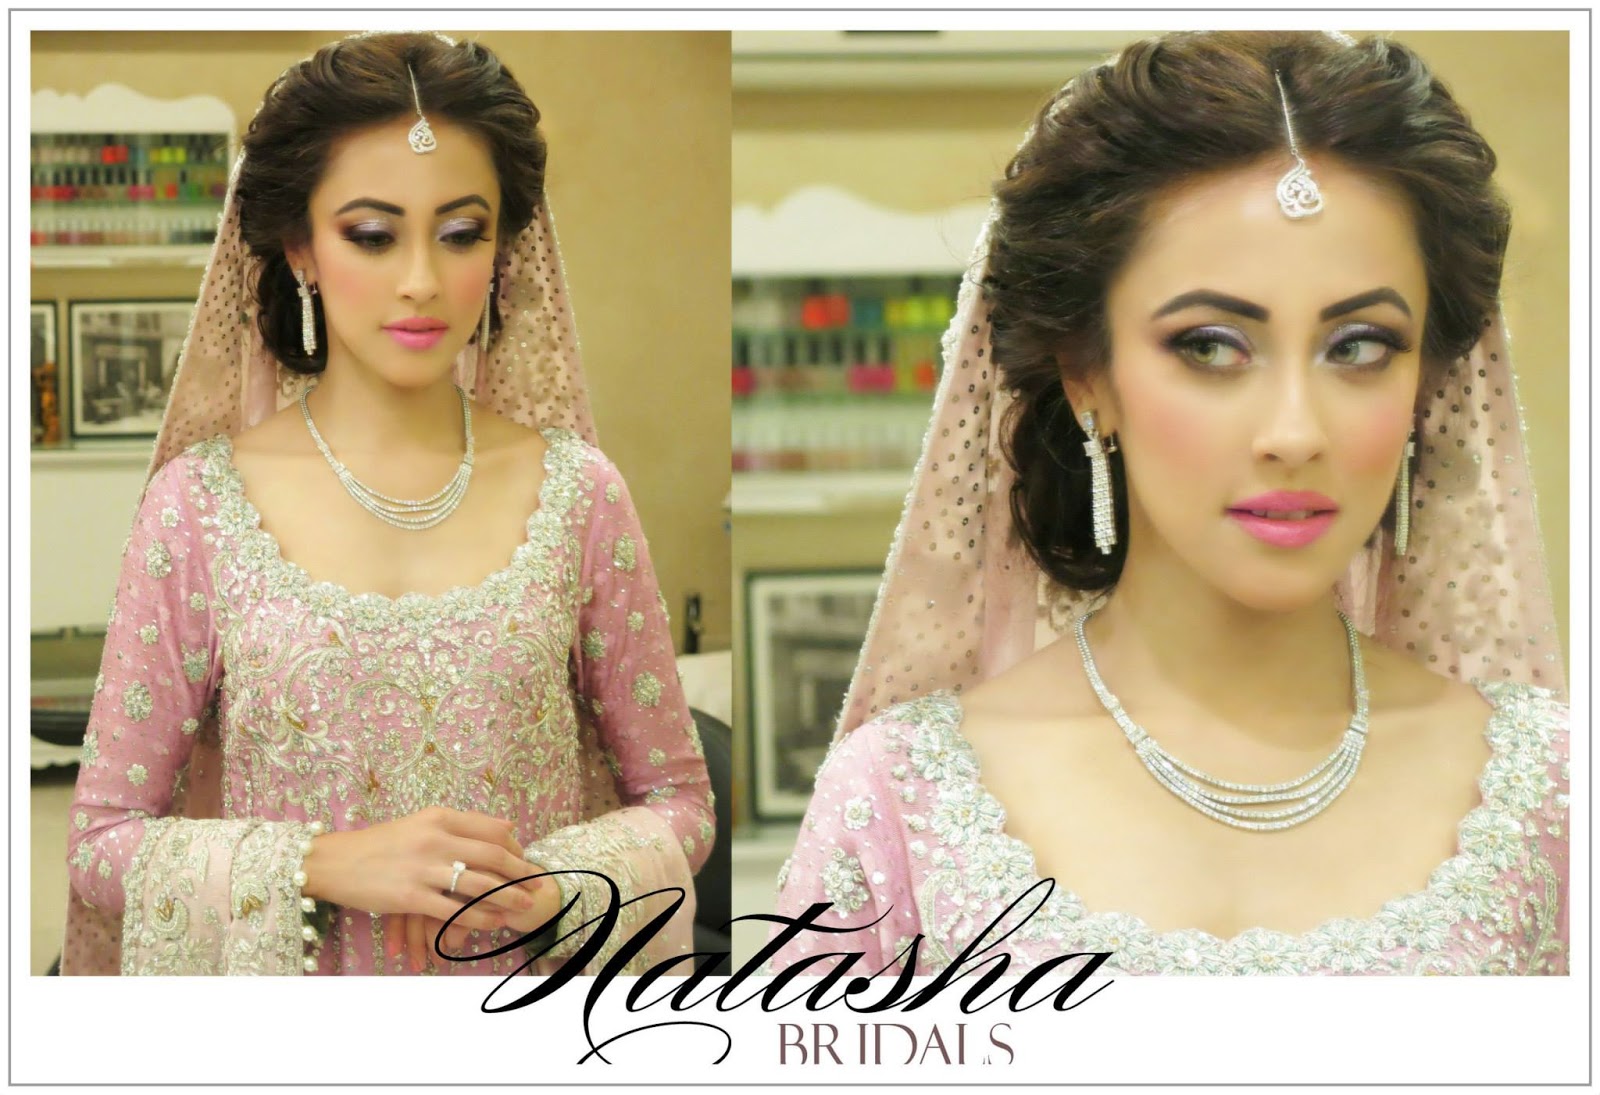 All in One..The best: Pakistani Bridal latest Make up and styling